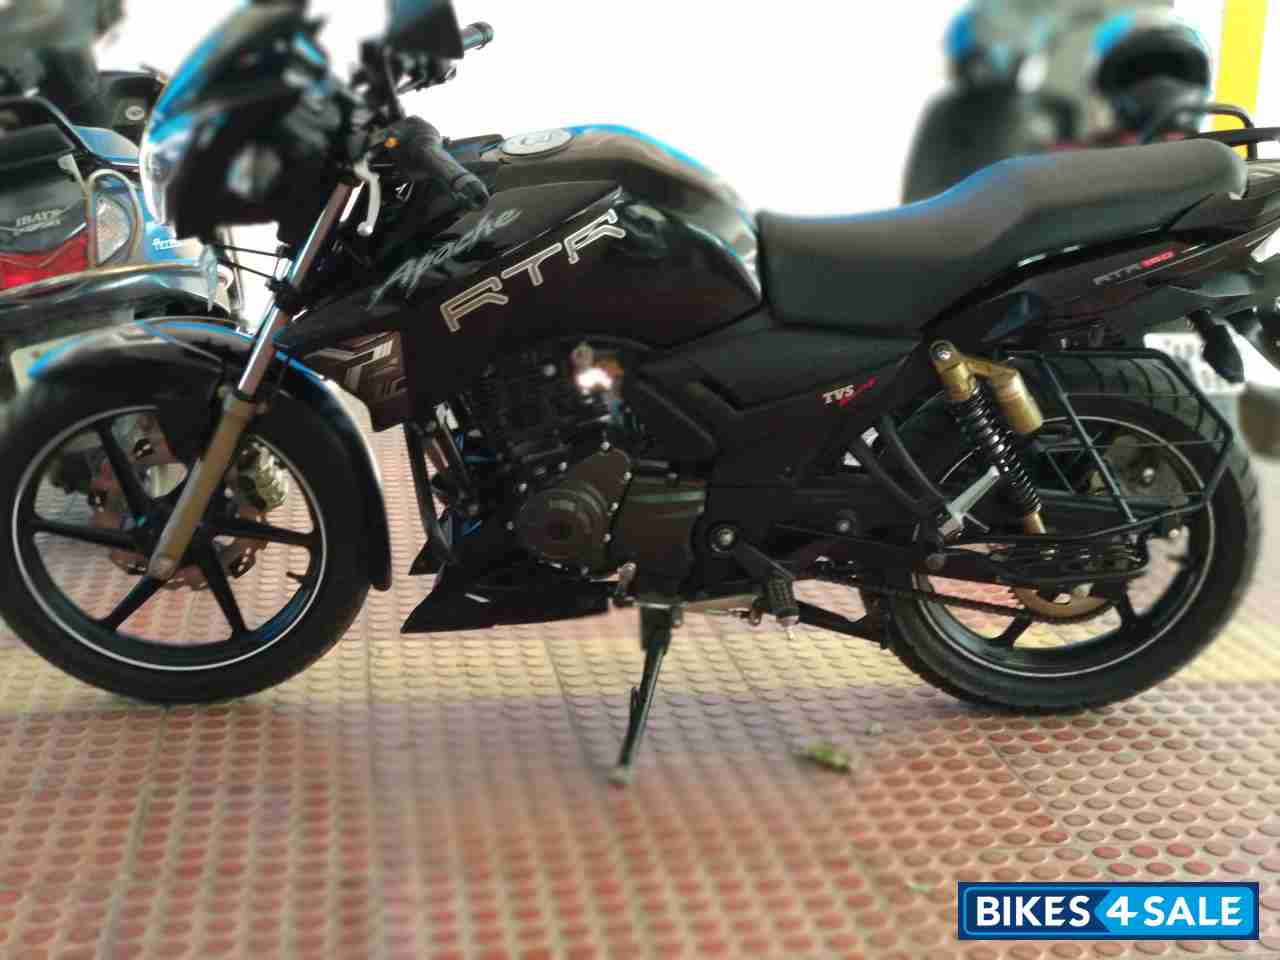 Used 2017 Model Tvs Apache Rtr 180 For Sale In Hyderabad - Tvs Apache Rtr 180 Black , HD Wallpaper & Backgrounds